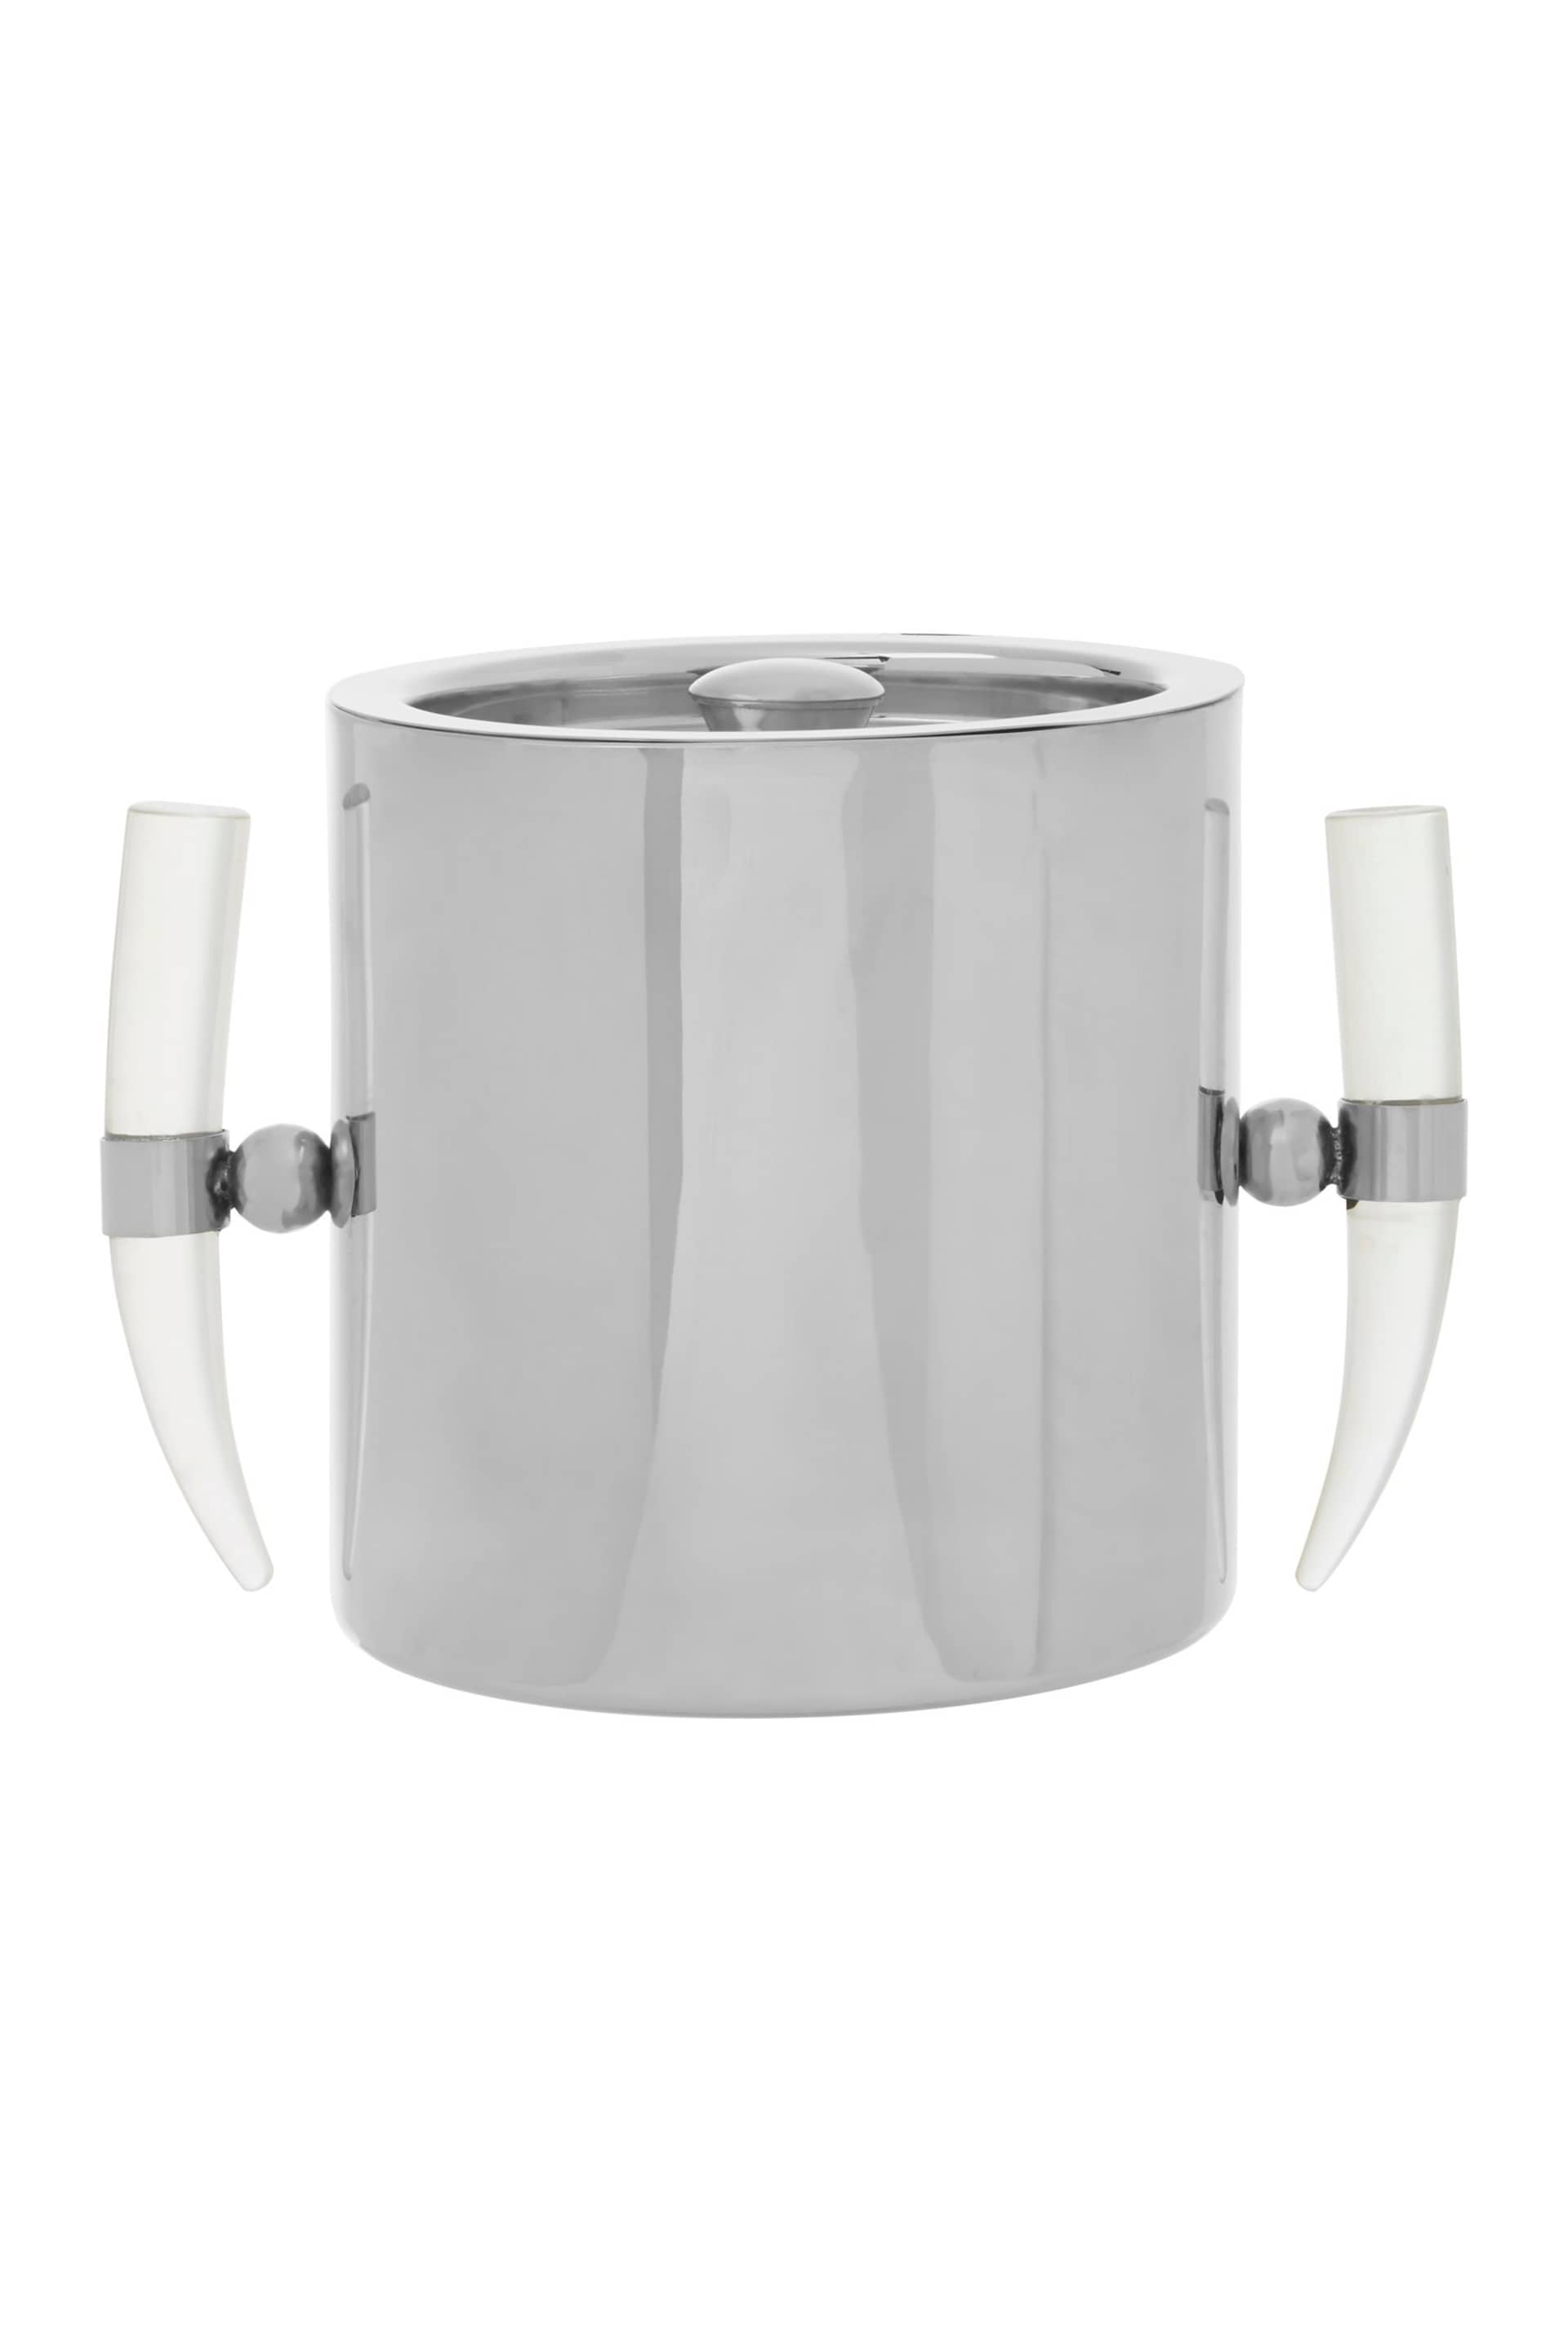 Fifty Five South Silver Herne Ice Bucket - Image 4 of 4